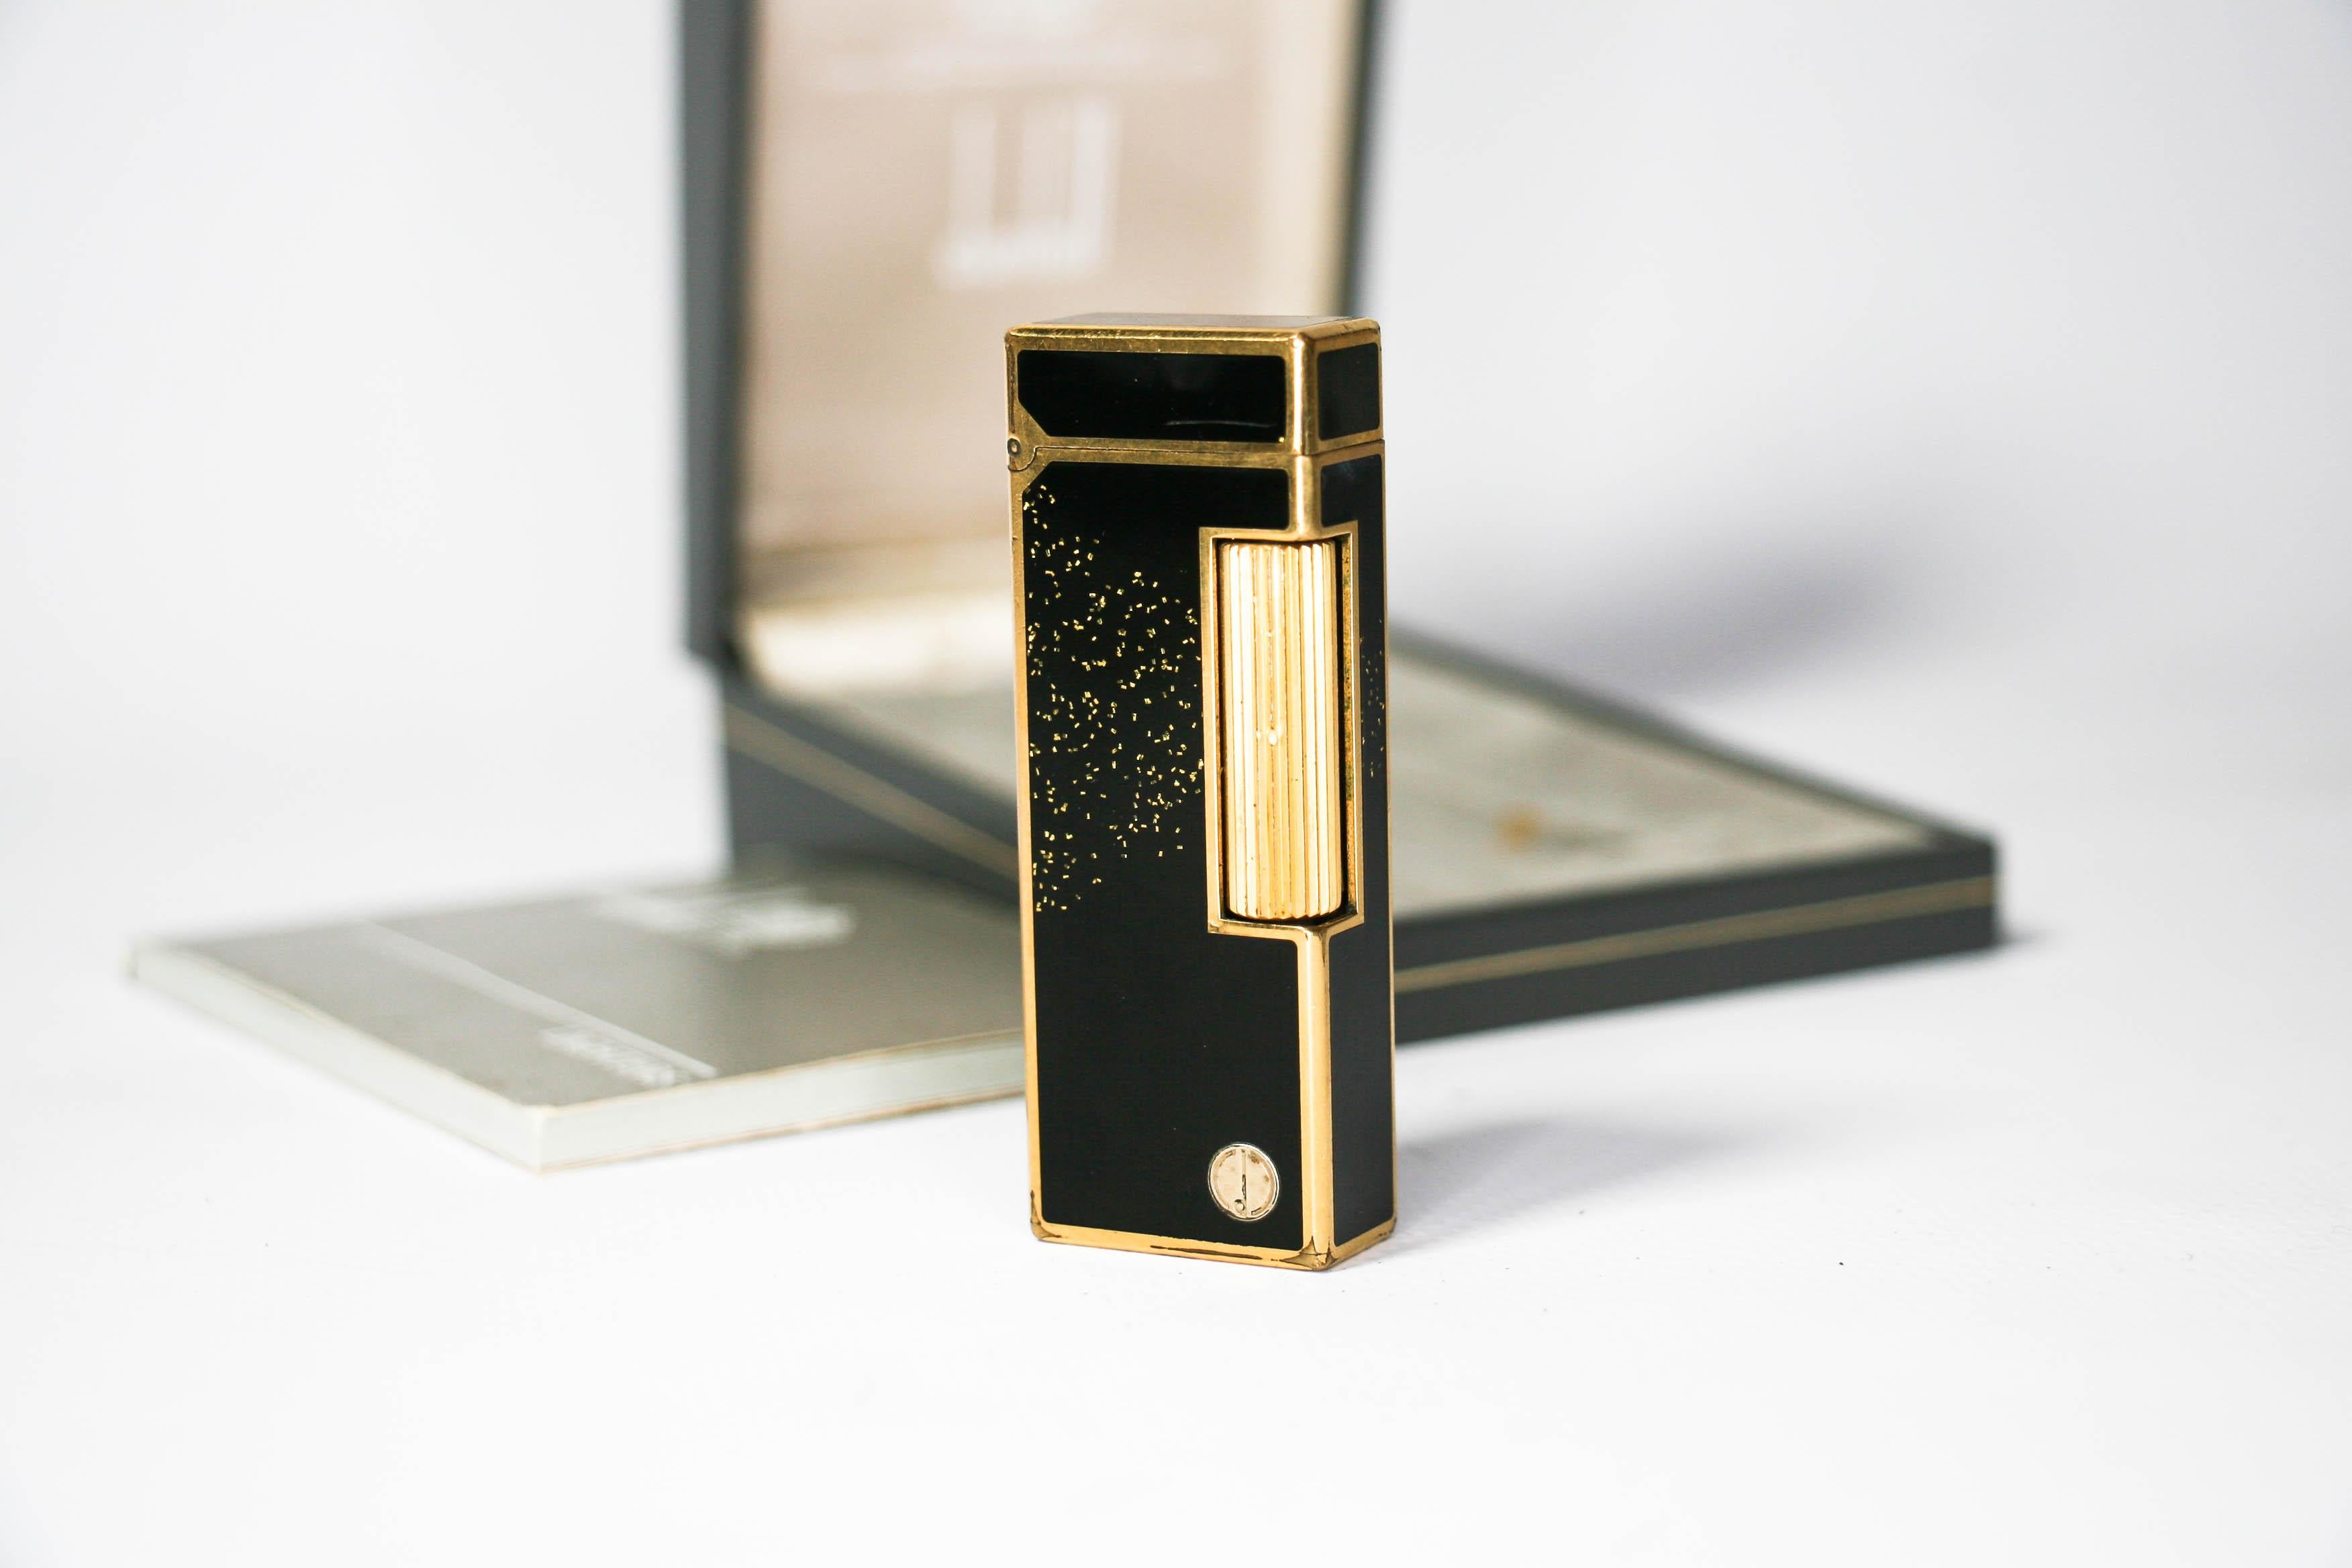 Vintage Dunhill Rollagas lighter Gold Dust In Box 1980s

The iconic Dunhill name is known for quality, well-made cigarette lighters and other smoking implements. The company’s origin can be traced to Alfred Dunhill opening his first tobacco shop in